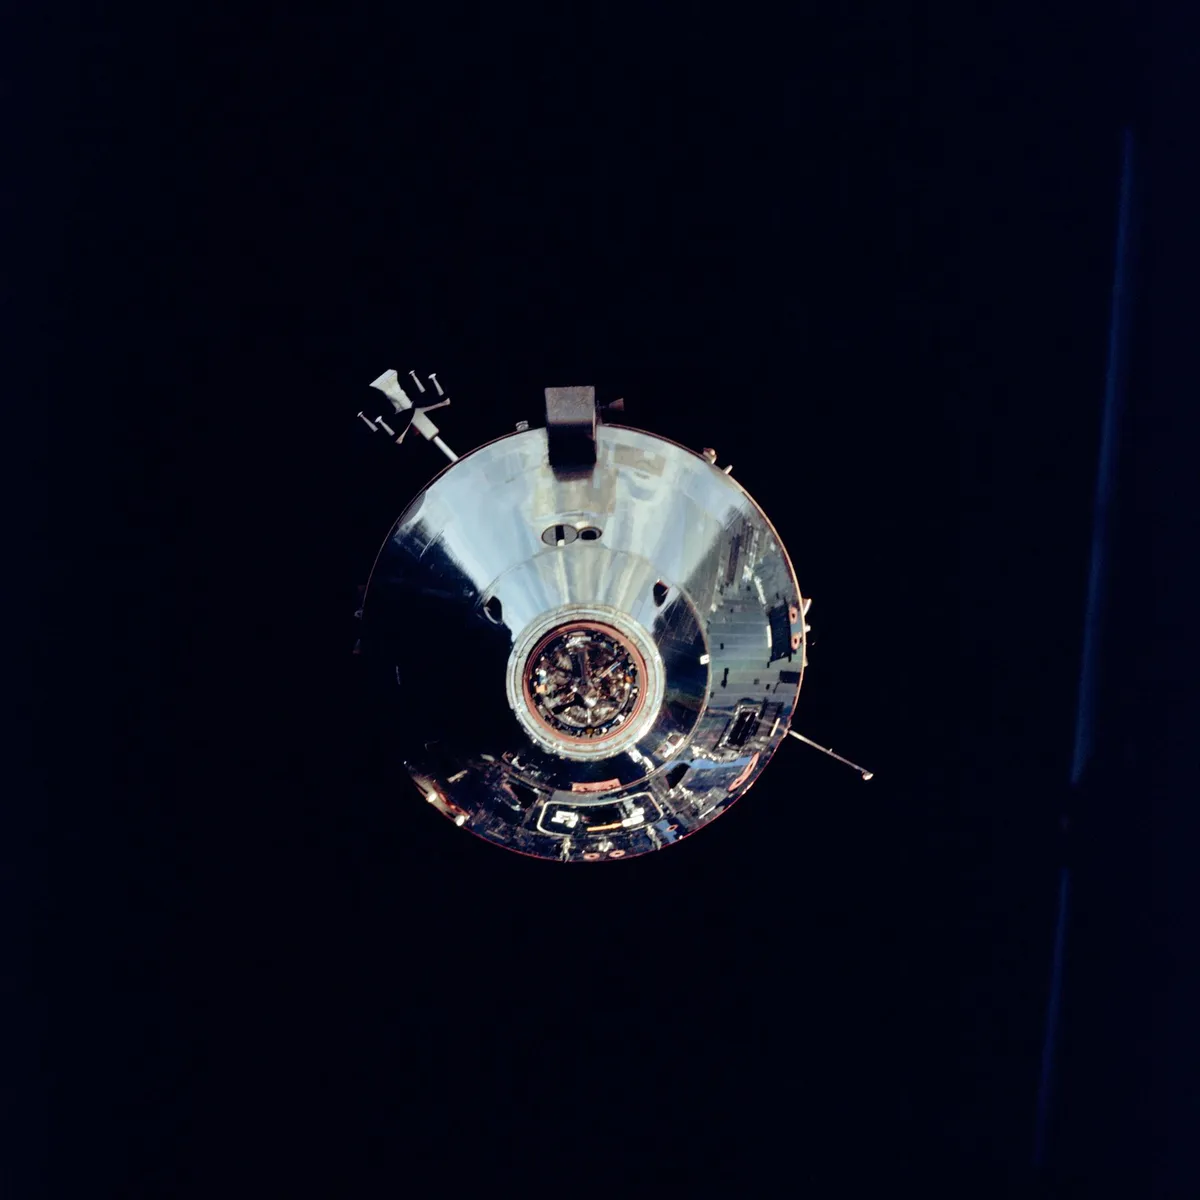 Apollo 9 Lunar Module,8 March 1969. During the fifth day of Apollo 9 Earth-orbital mission, the Command Module photographs the Lunar Module 